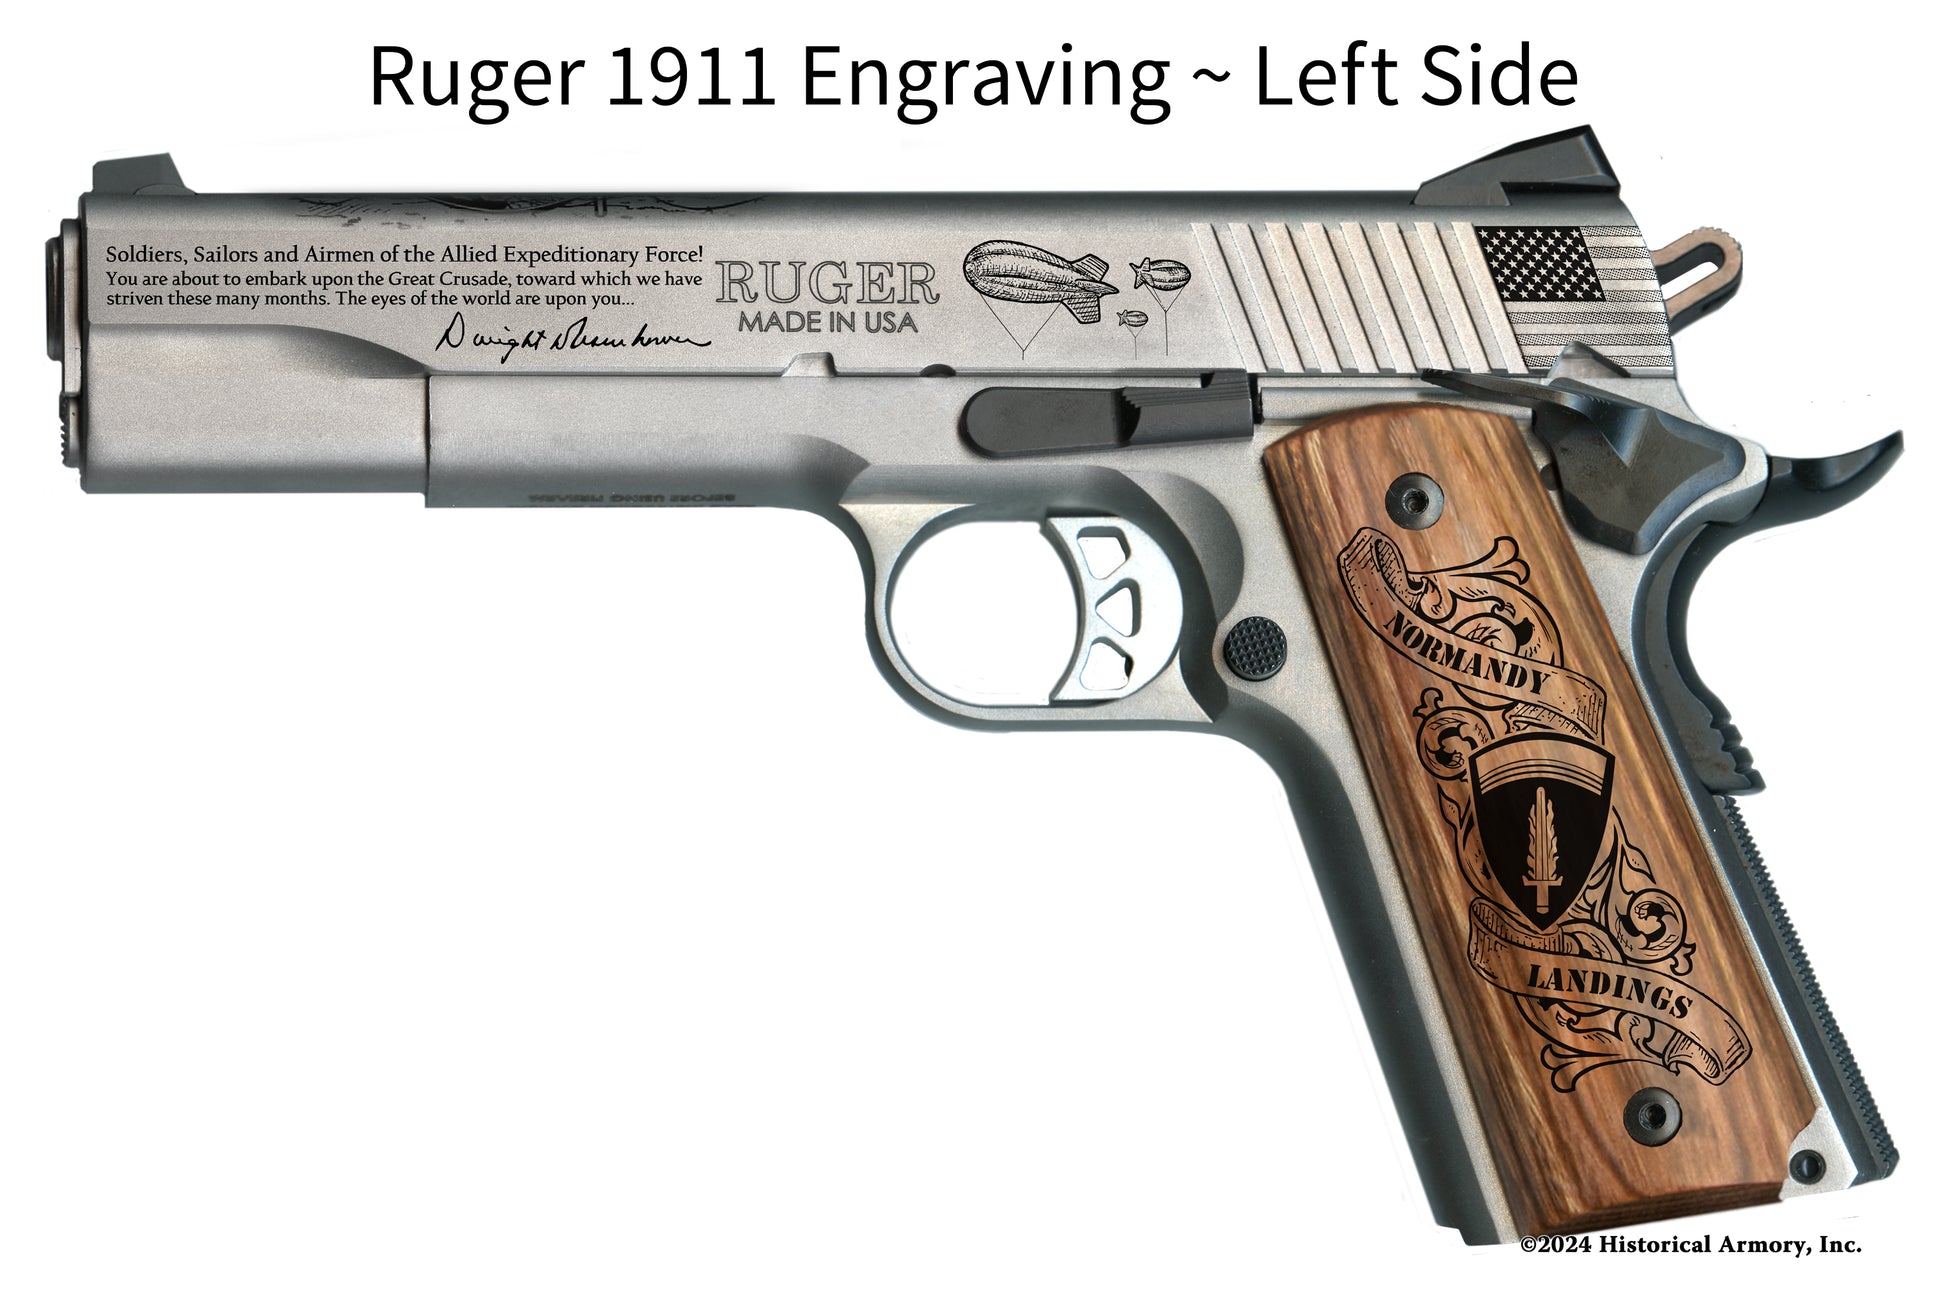 D-Day Ruger 1911 Limited Edition